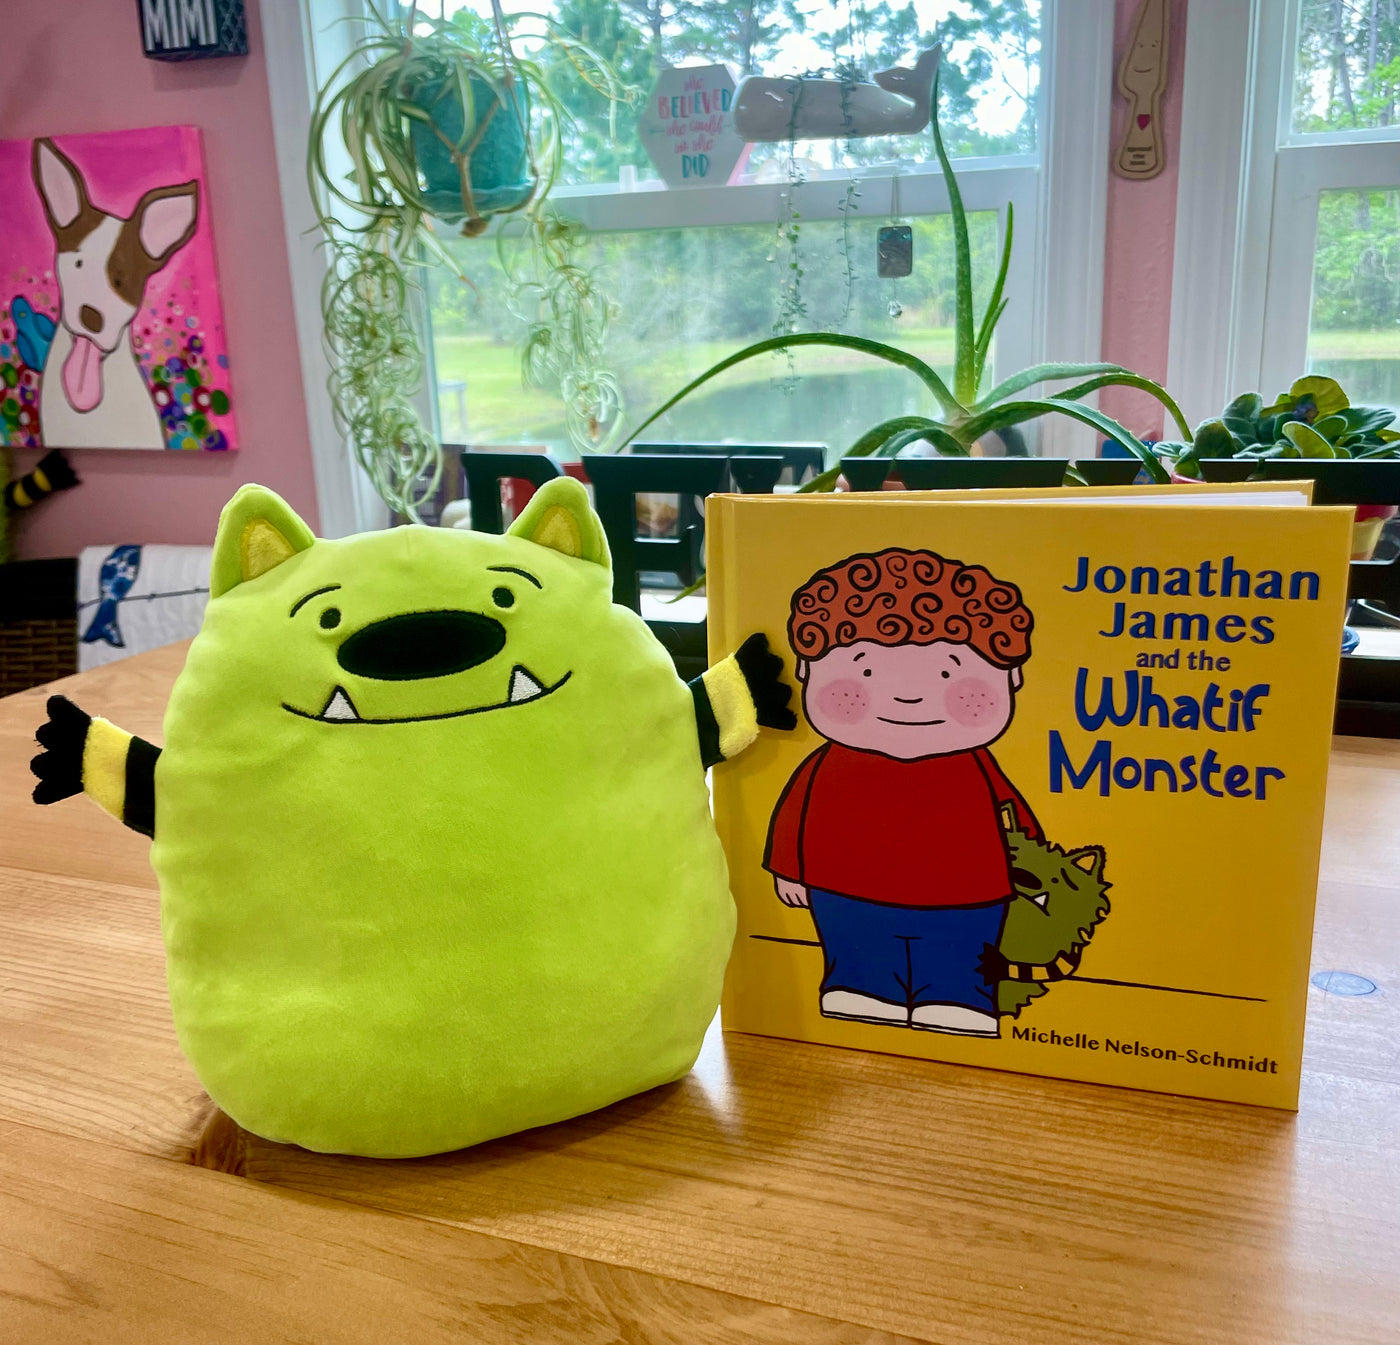 Jonathan James and the Whatif Monster Picture Book and Anniversary Edition Whatif Monster Plush